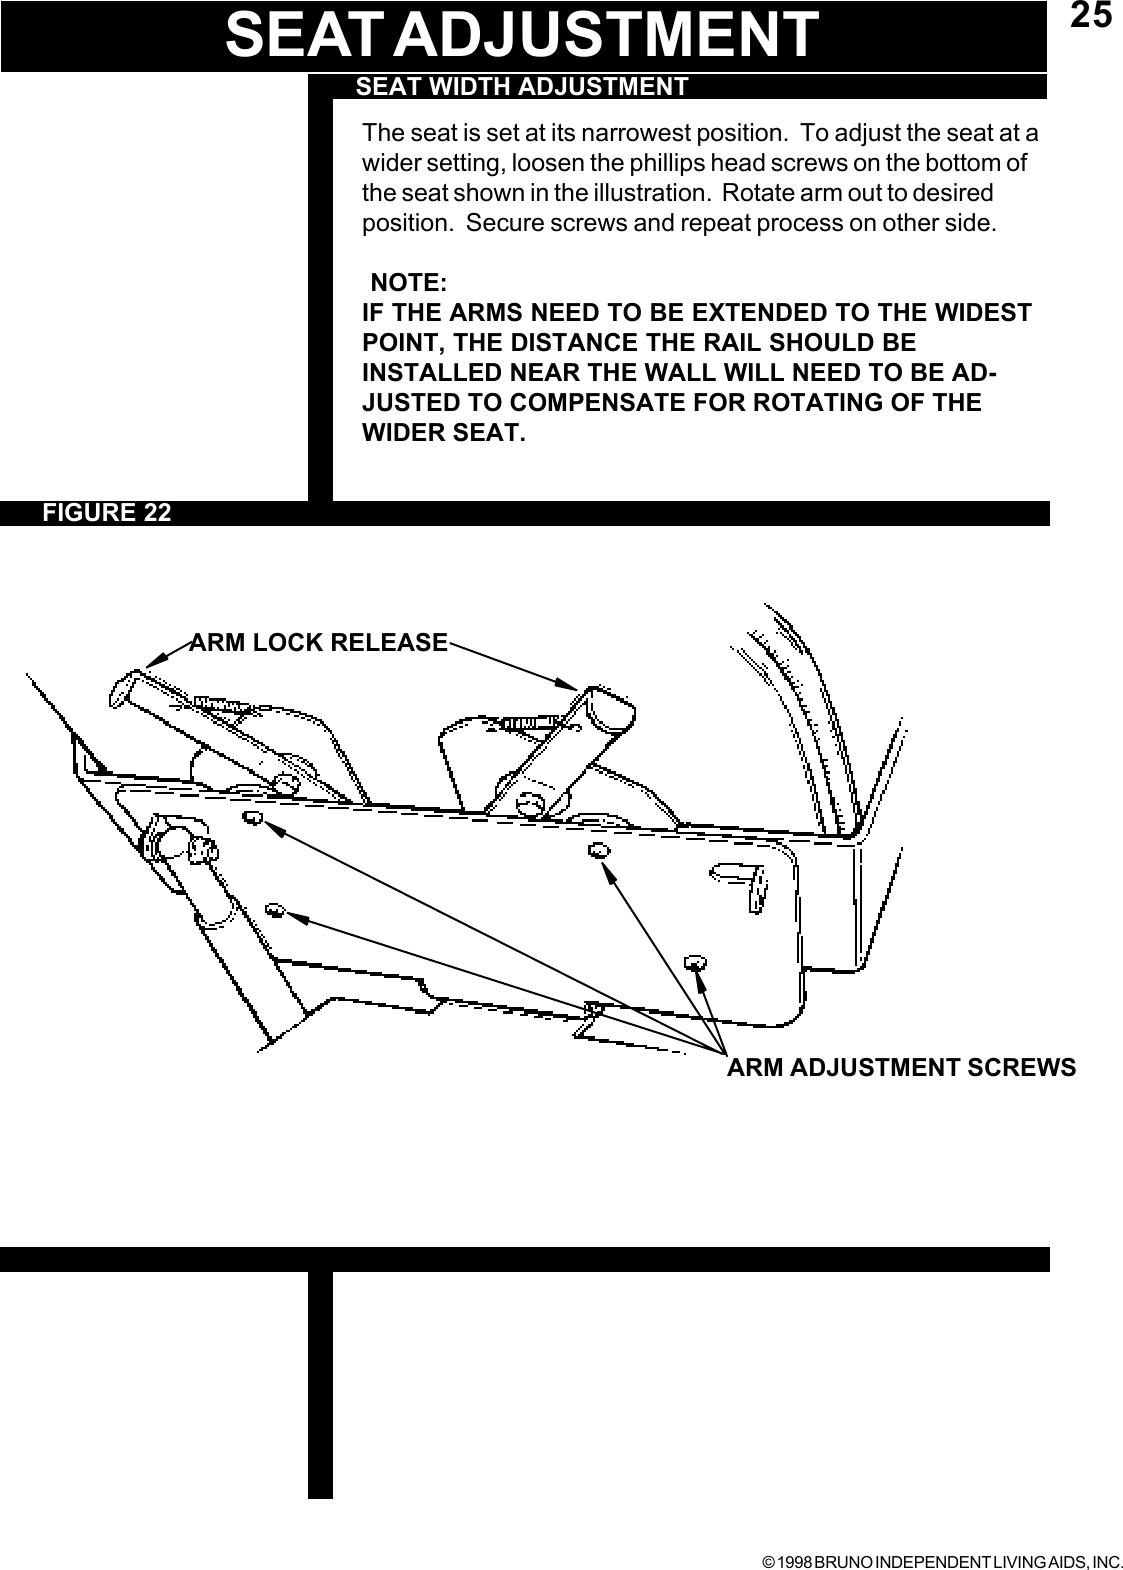 © 1998 BRUNO INDEPENDENT LIVING AIDS, INC.25FIGURE 22SEAT WIDTH ADJUSTMENTThe seat is set at its narrowest position.  To adjust the seat at awider setting, loosen the phillips head screws on the bottom ofthe seat shown in the illustration.  Rotate arm out to desiredposition.  Secure screws and repeat process on other side. NOTE:IF THE ARMS NEED TO BE EXTENDED TO THE WIDESTPOINT, THE DISTANCE THE RAIL SHOULD BEINSTALLED NEAR THE WALL WILL NEED TO BE AD-JUSTED TO COMPENSATE FOR ROTATING OF THEWIDER SEAT.ARM ADJUSTMENT SCREWSSEAT ADJUSTMENT          ARM LOCK RELEASE